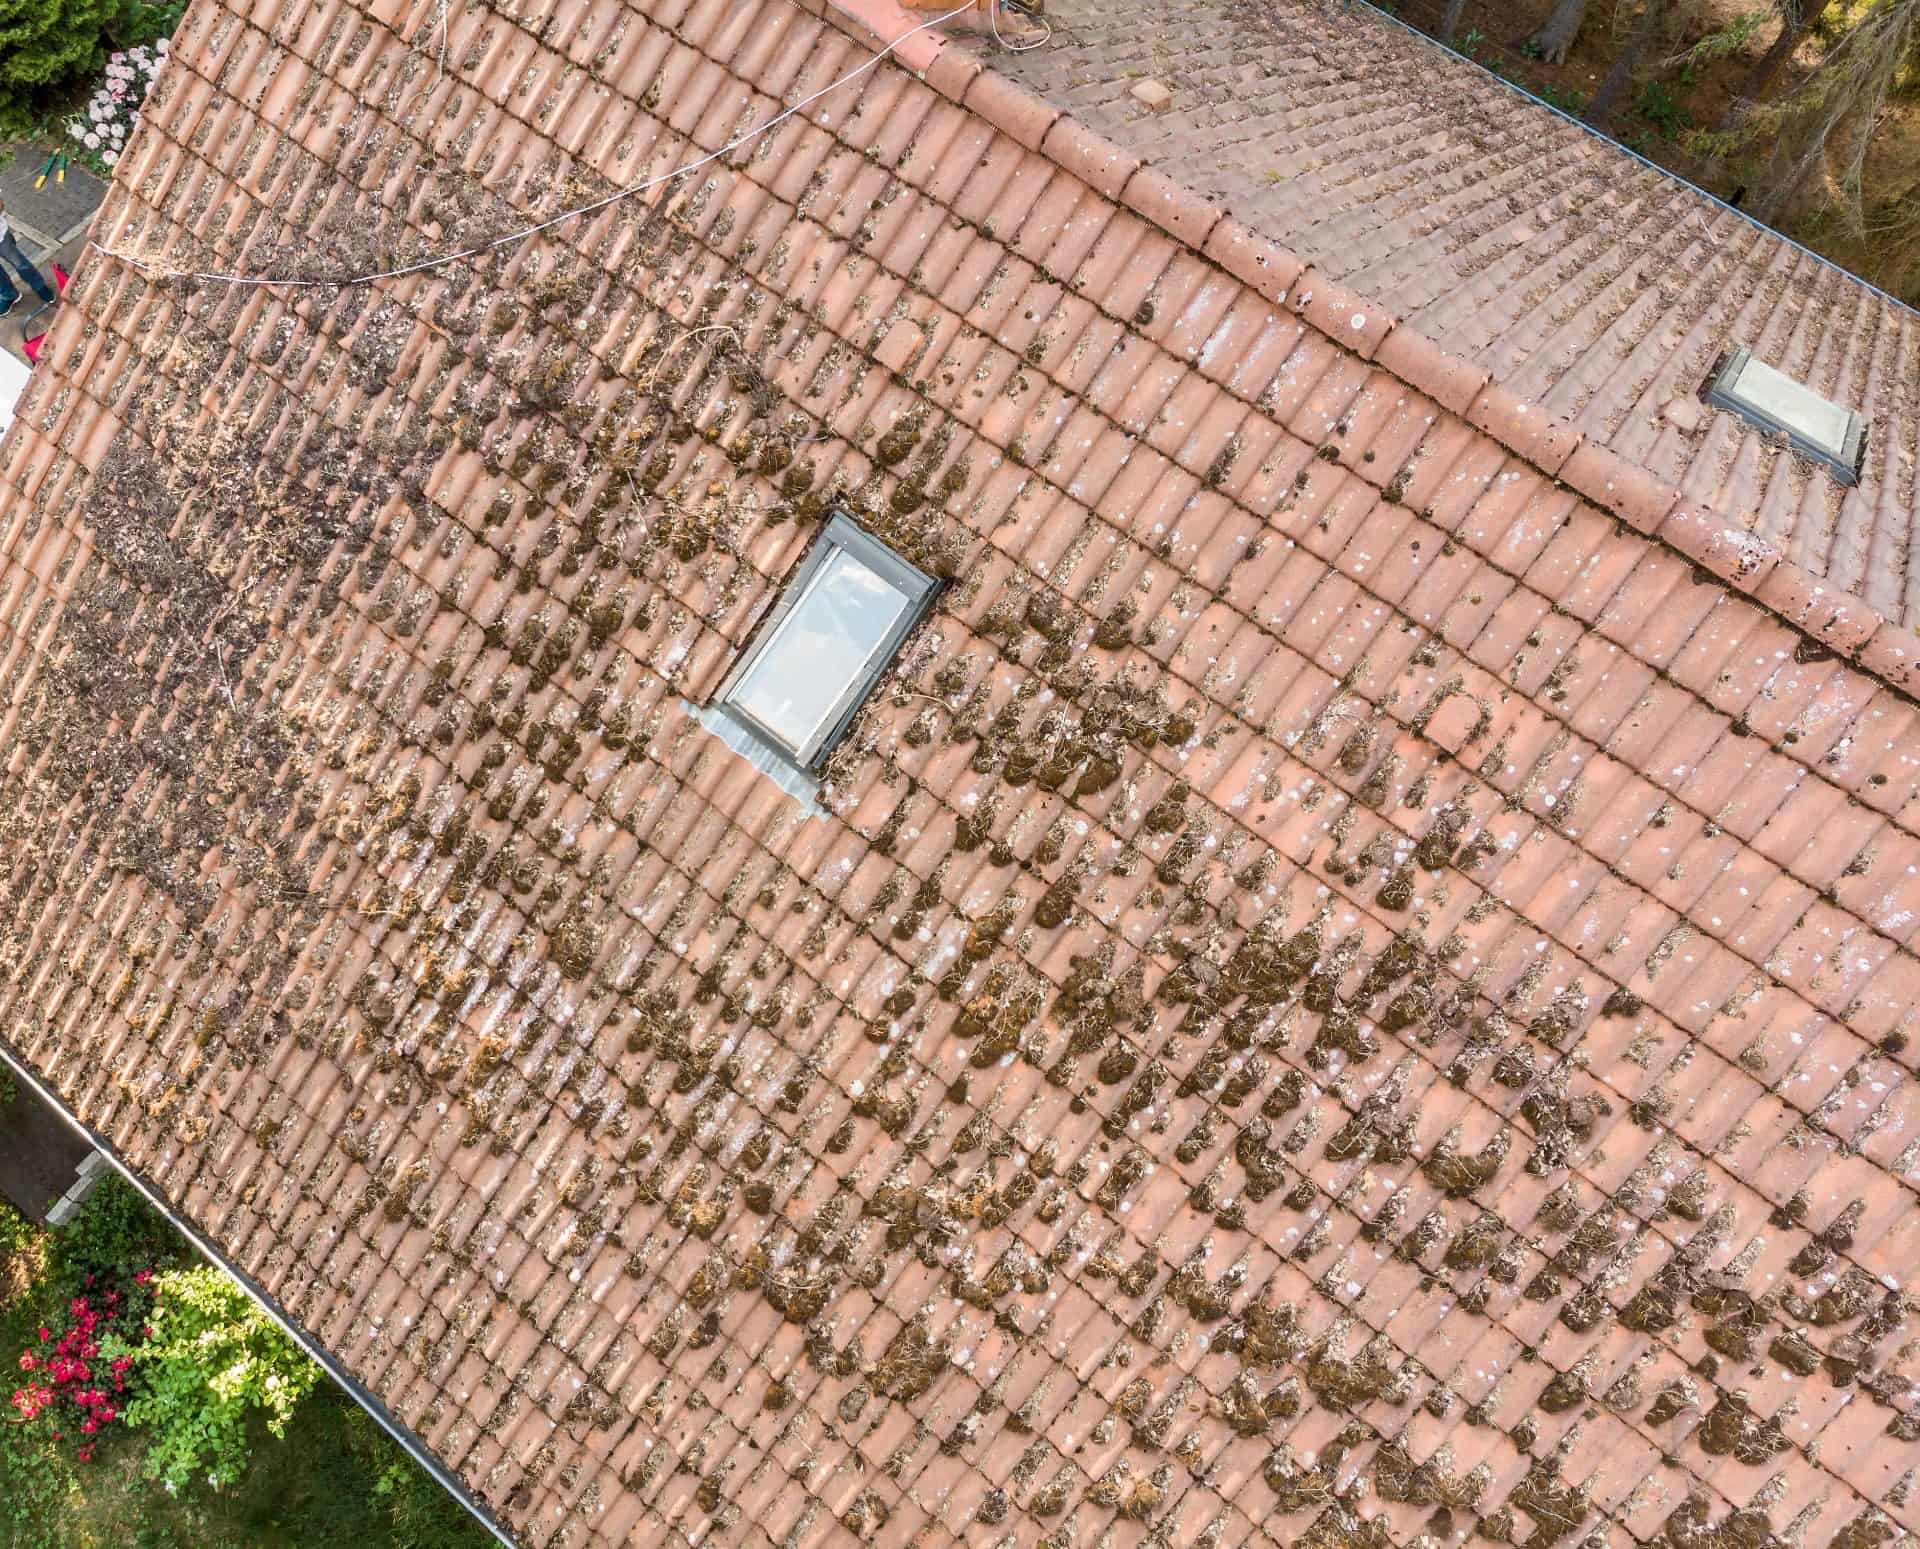 Moss and Fungus on Shingles on Roof